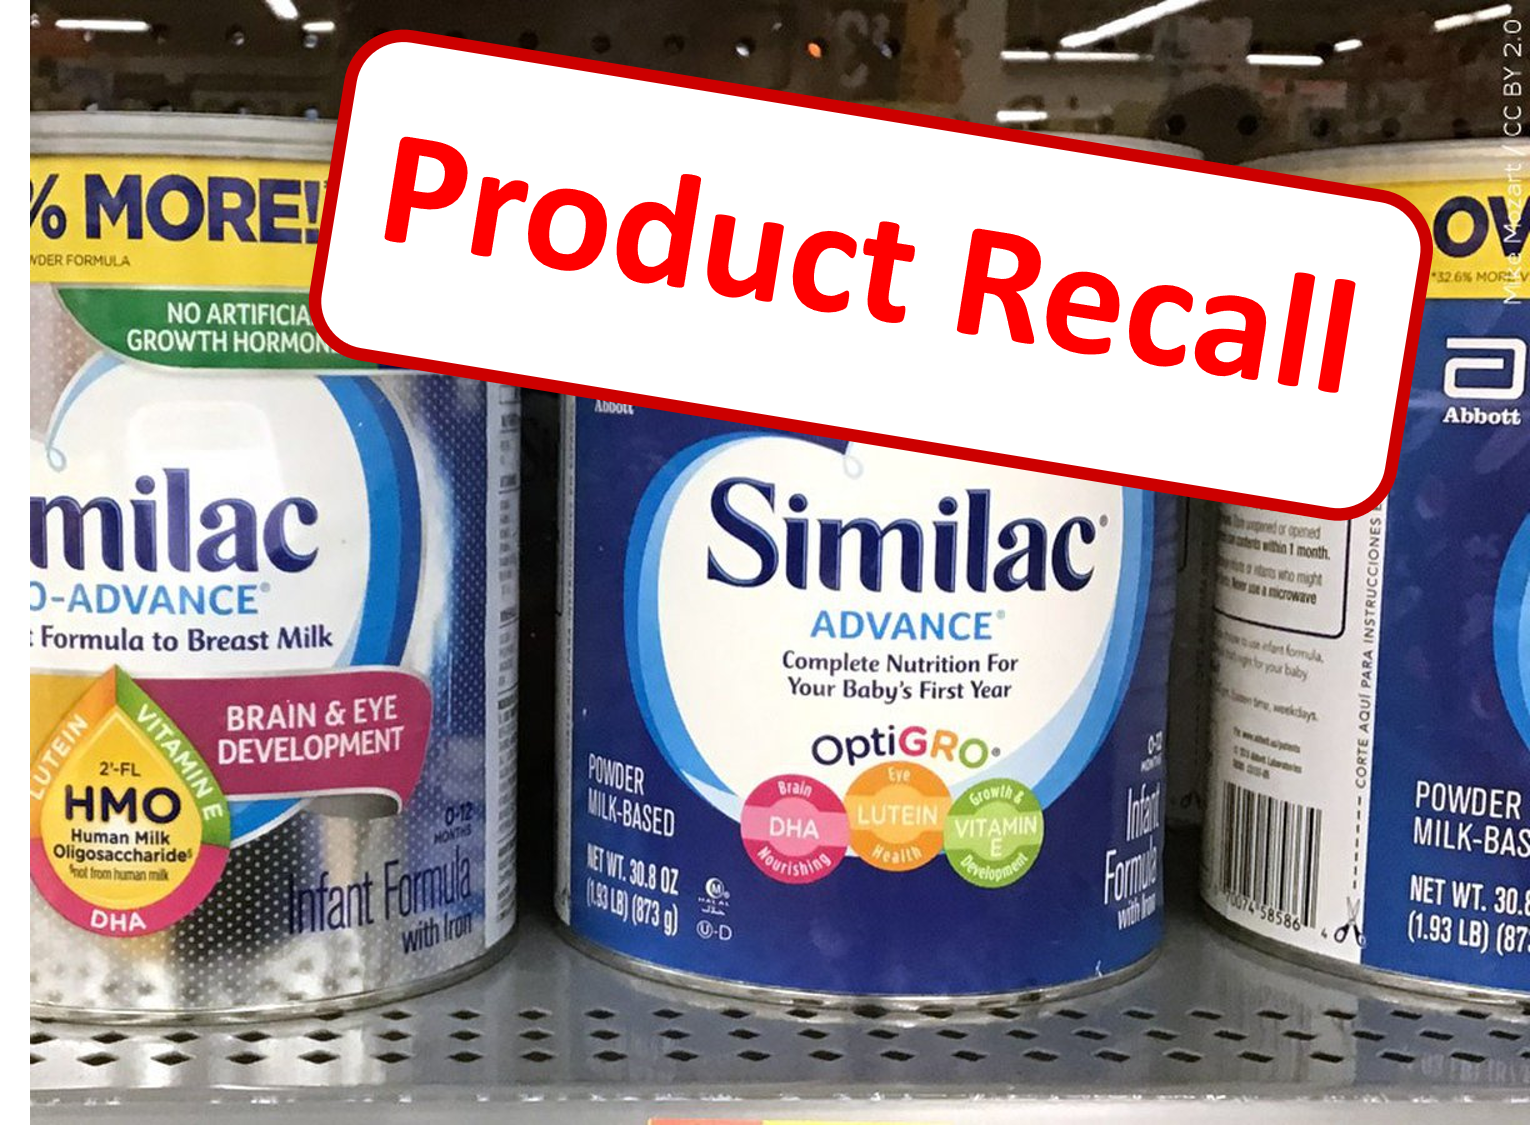 Jollys announces recall of Similac baby formula products following